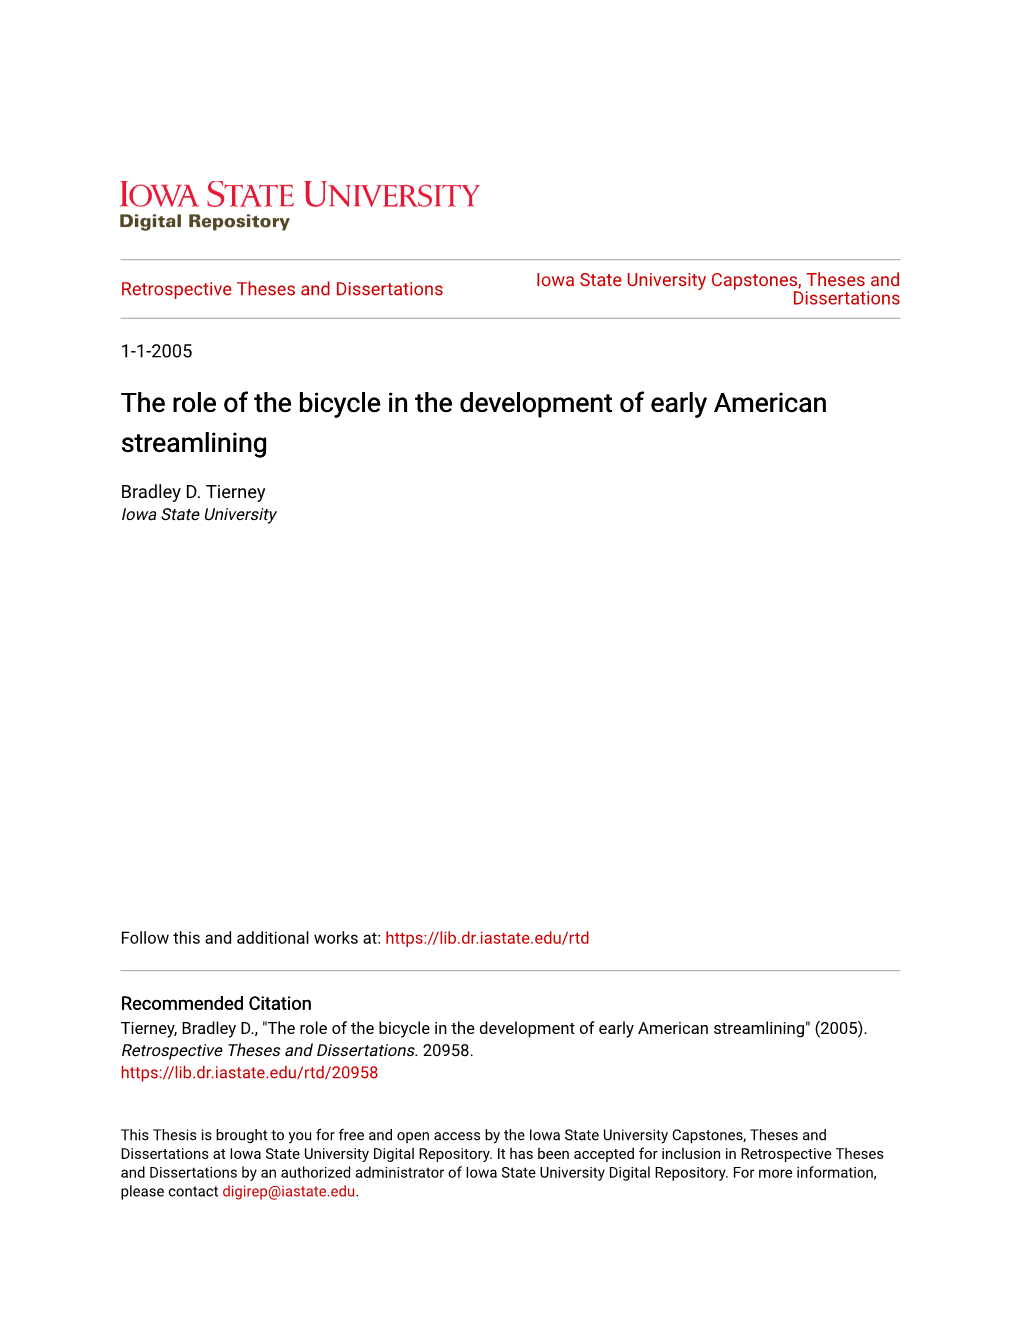 The Role of the Bicycle in the Development of Early American Streamlining